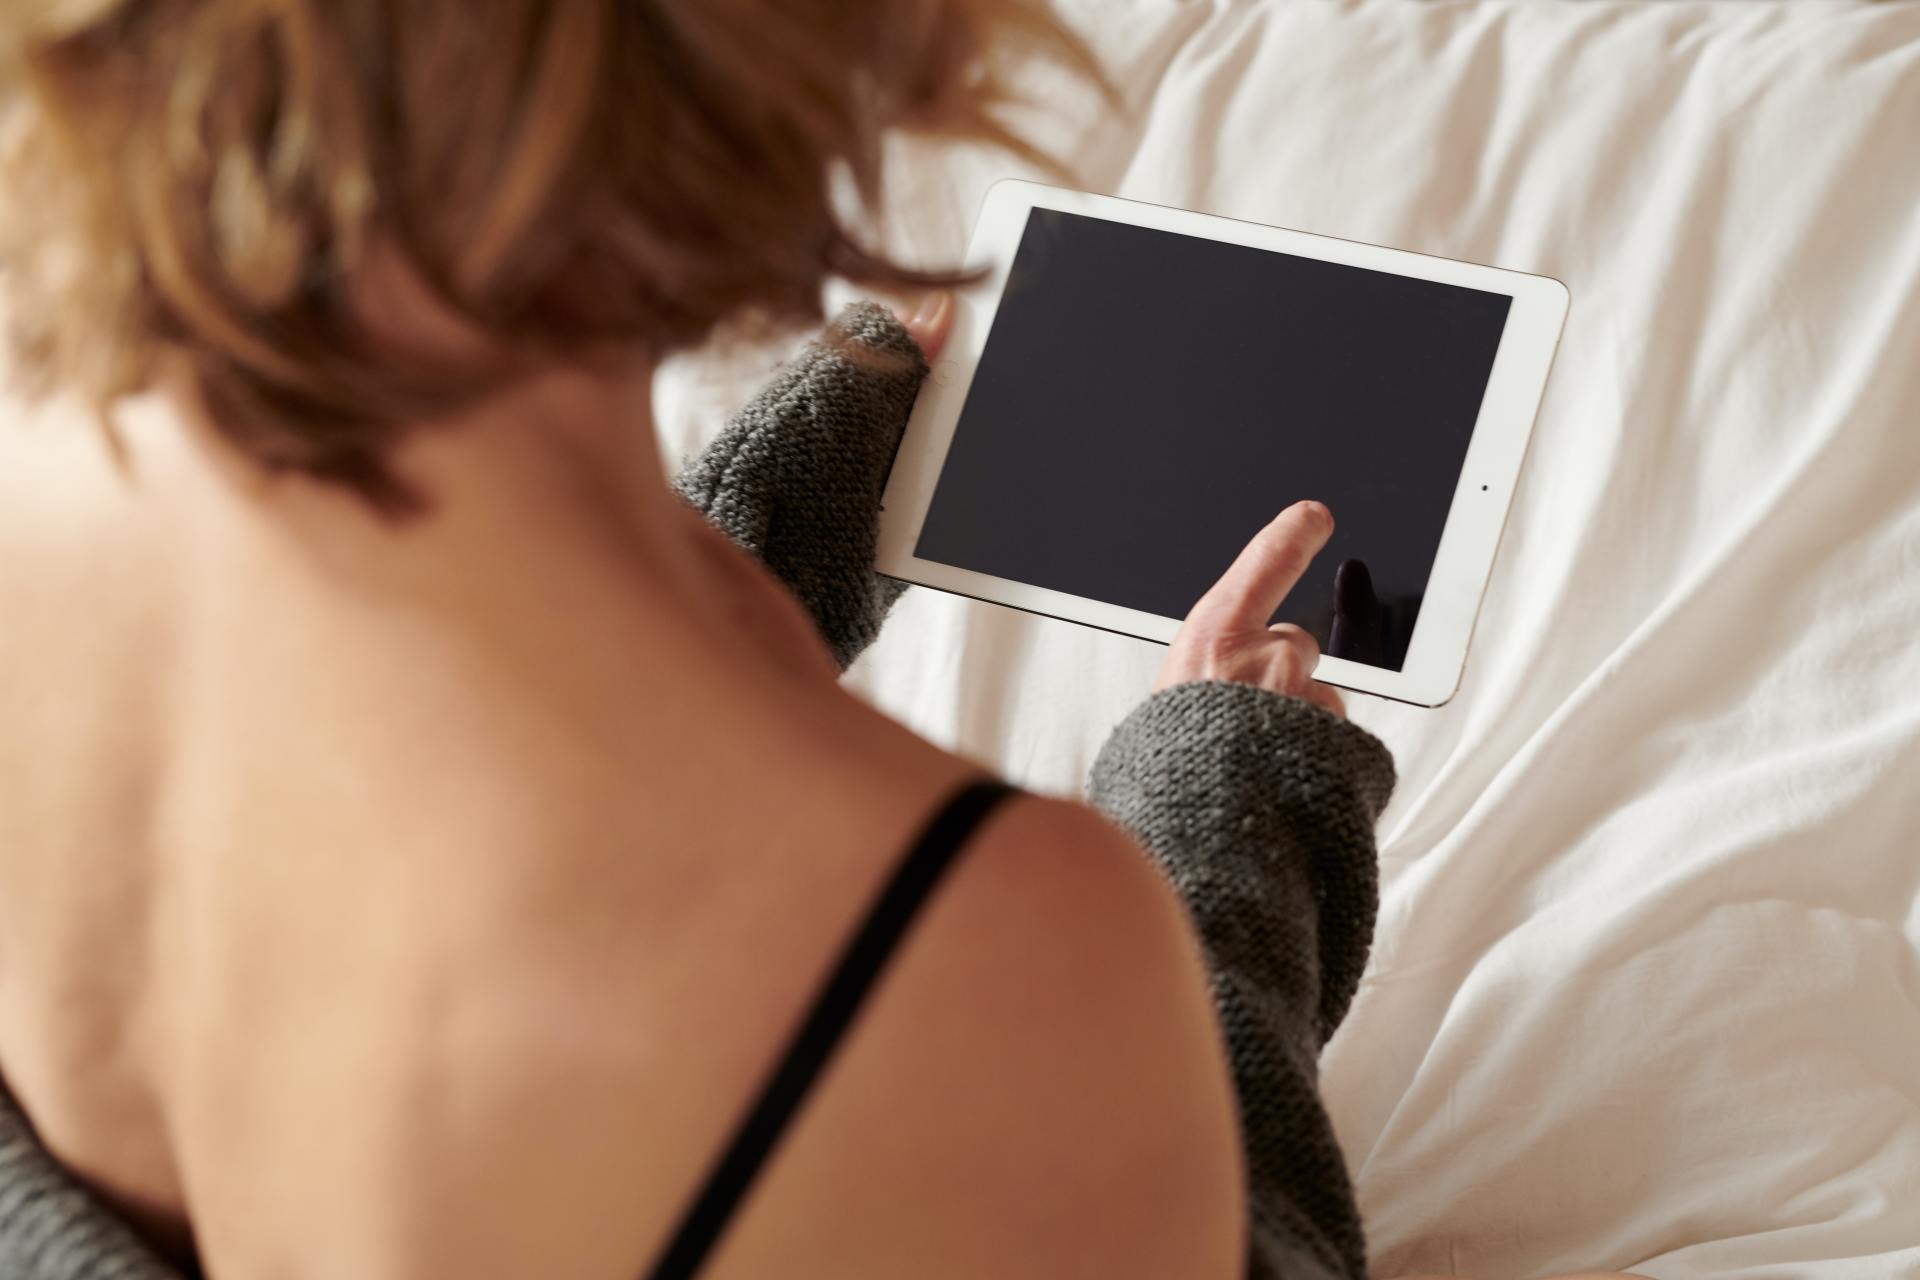 Watching Women Watching Porn - 30 Signs A Woman Watches Too Much Porn | Thought Catalog